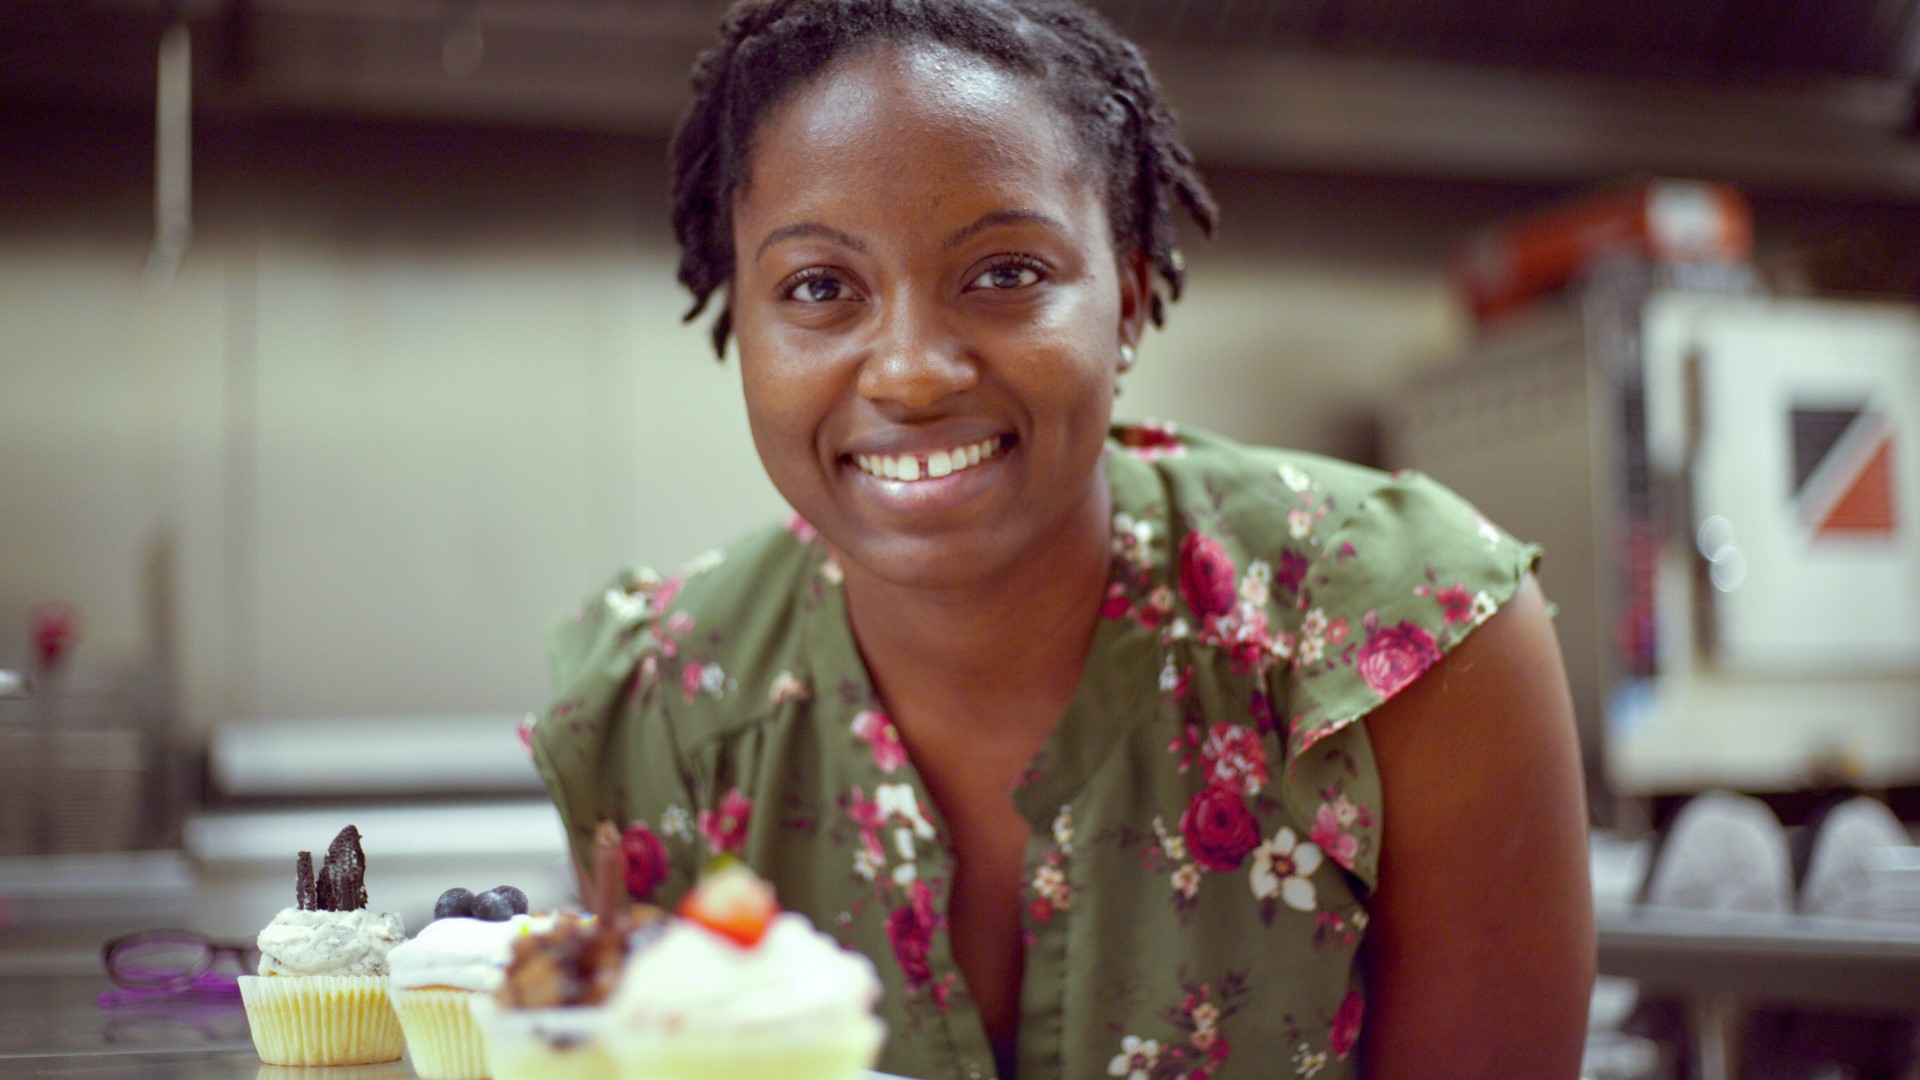 Sugar Soriee Baking Company is new to the Mill Hill Bakers Collective and ready to take on the confectionery world by storm. Whitney Cunningham, Sugar Soriee's owner, says the Hennessy cupcakes are a big hit.